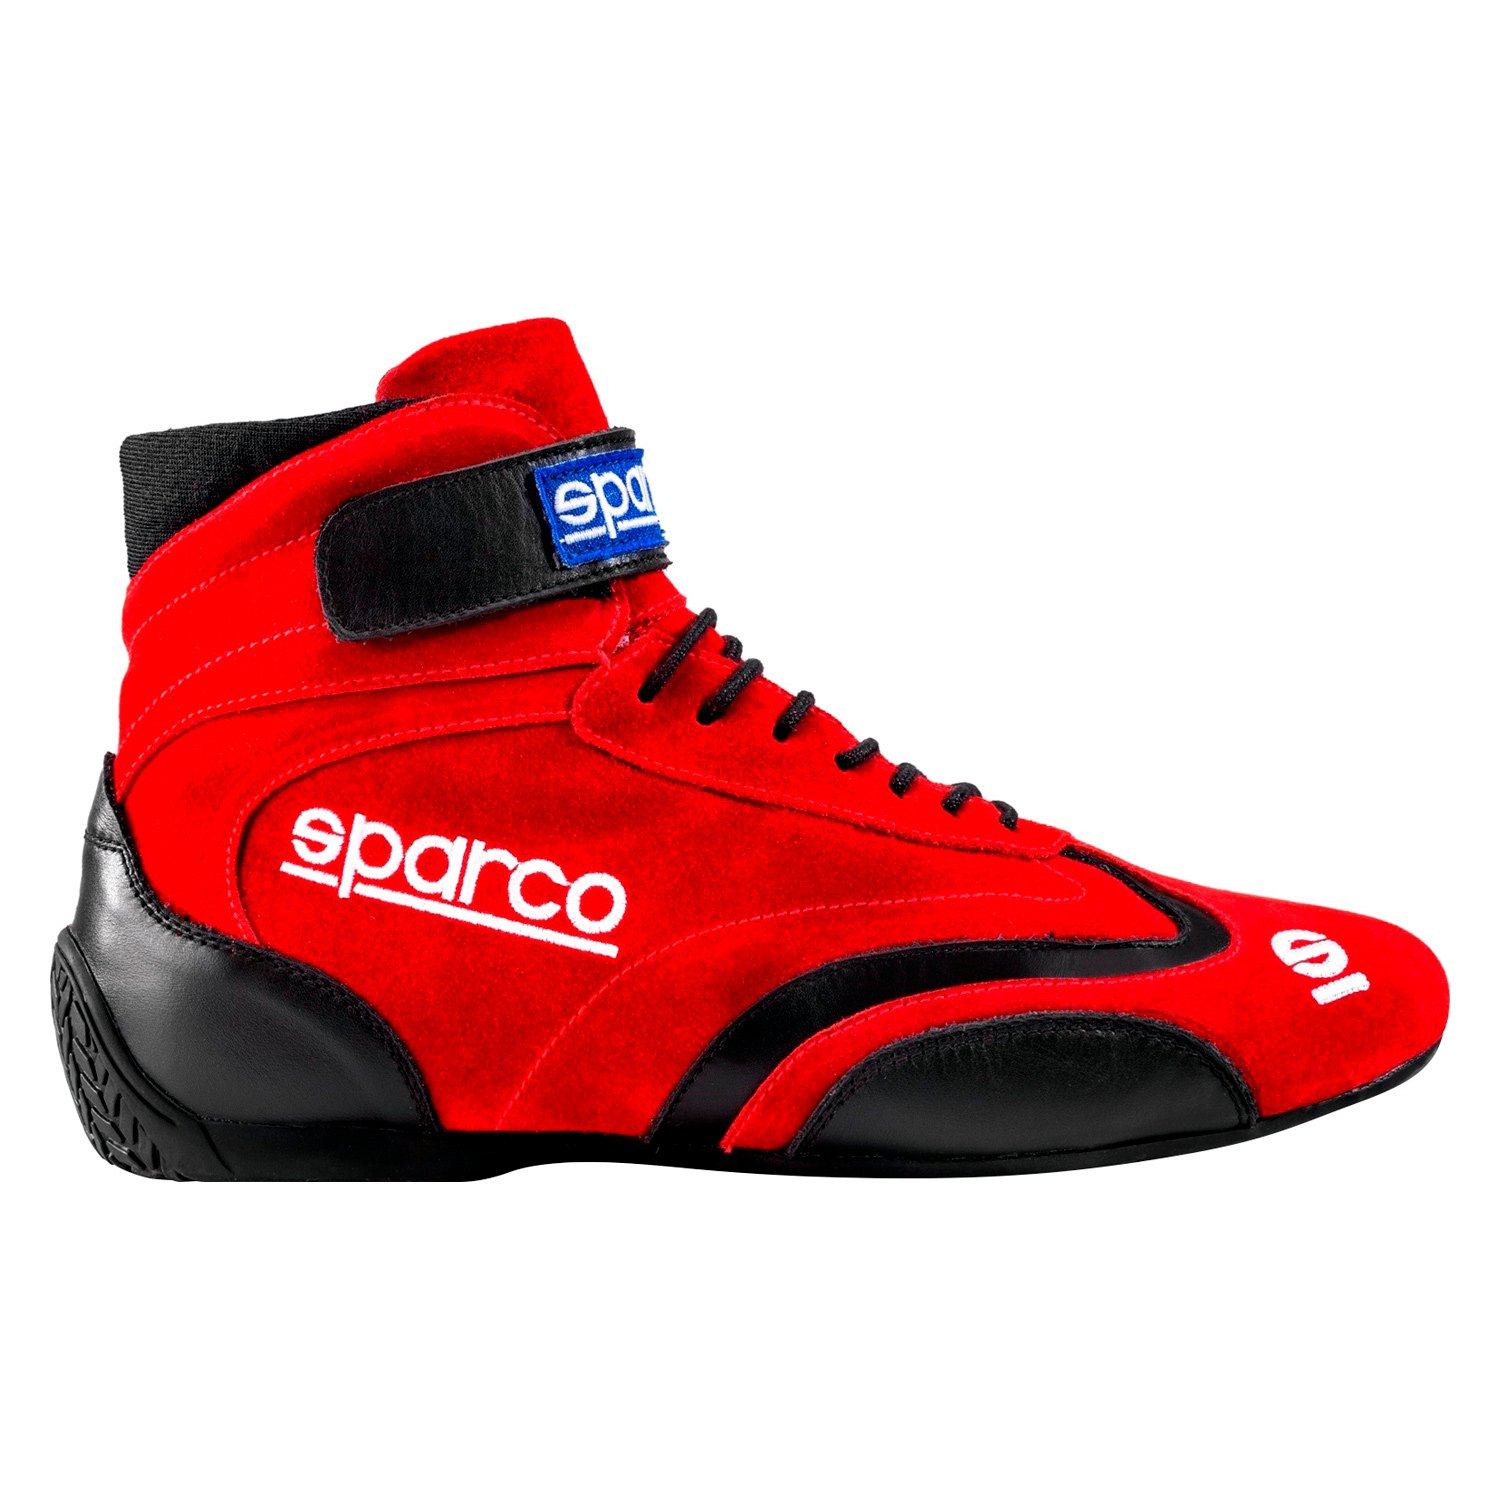 Sparco® - Top Series Racing Shoes